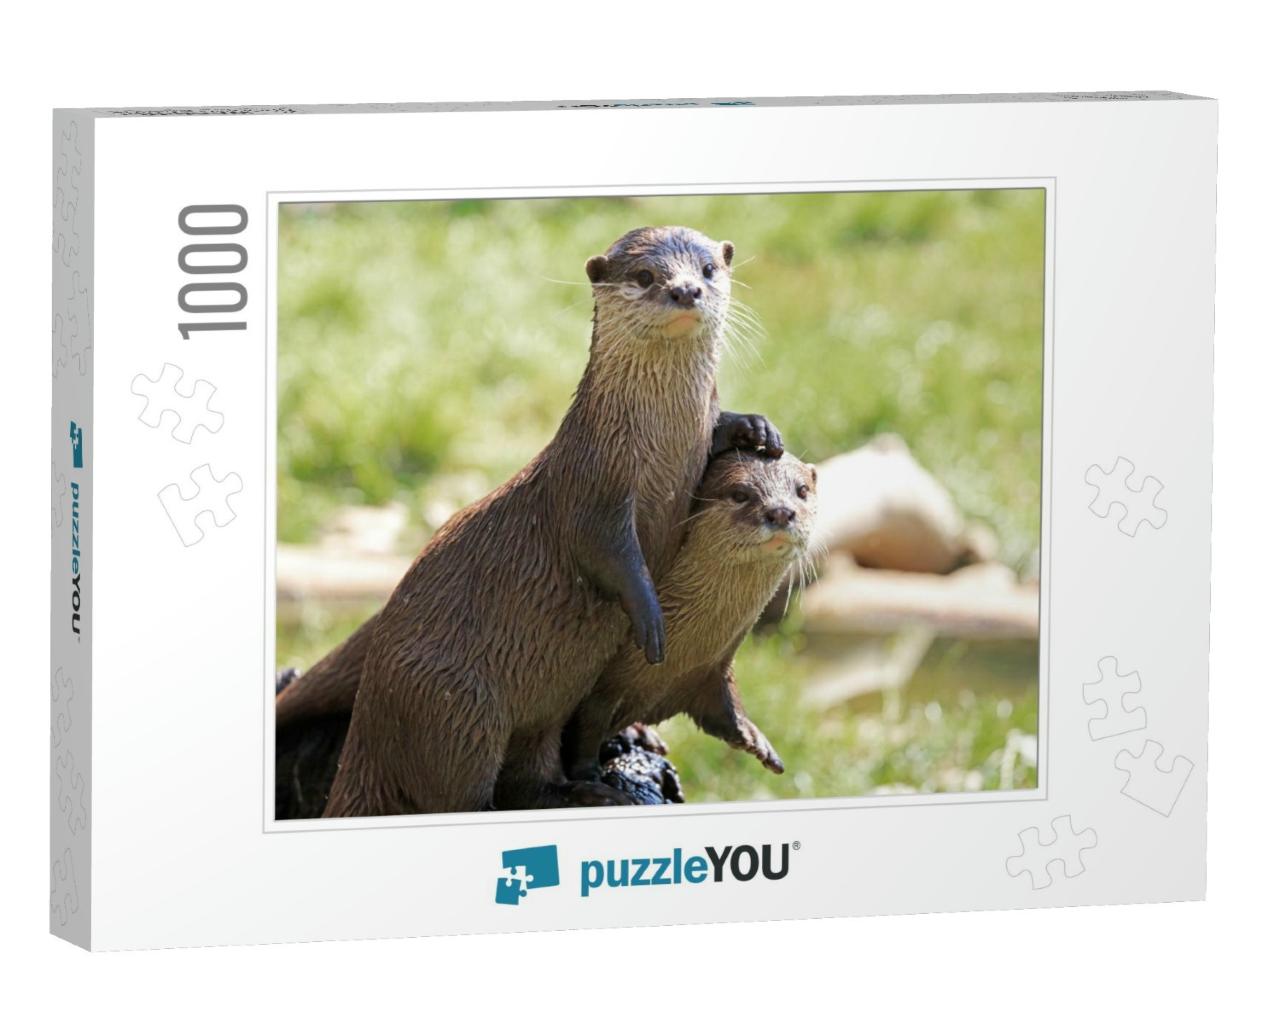 Pair of River Otters with the Foot of One Otter Resting o... Jigsaw Puzzle with 1000 pieces